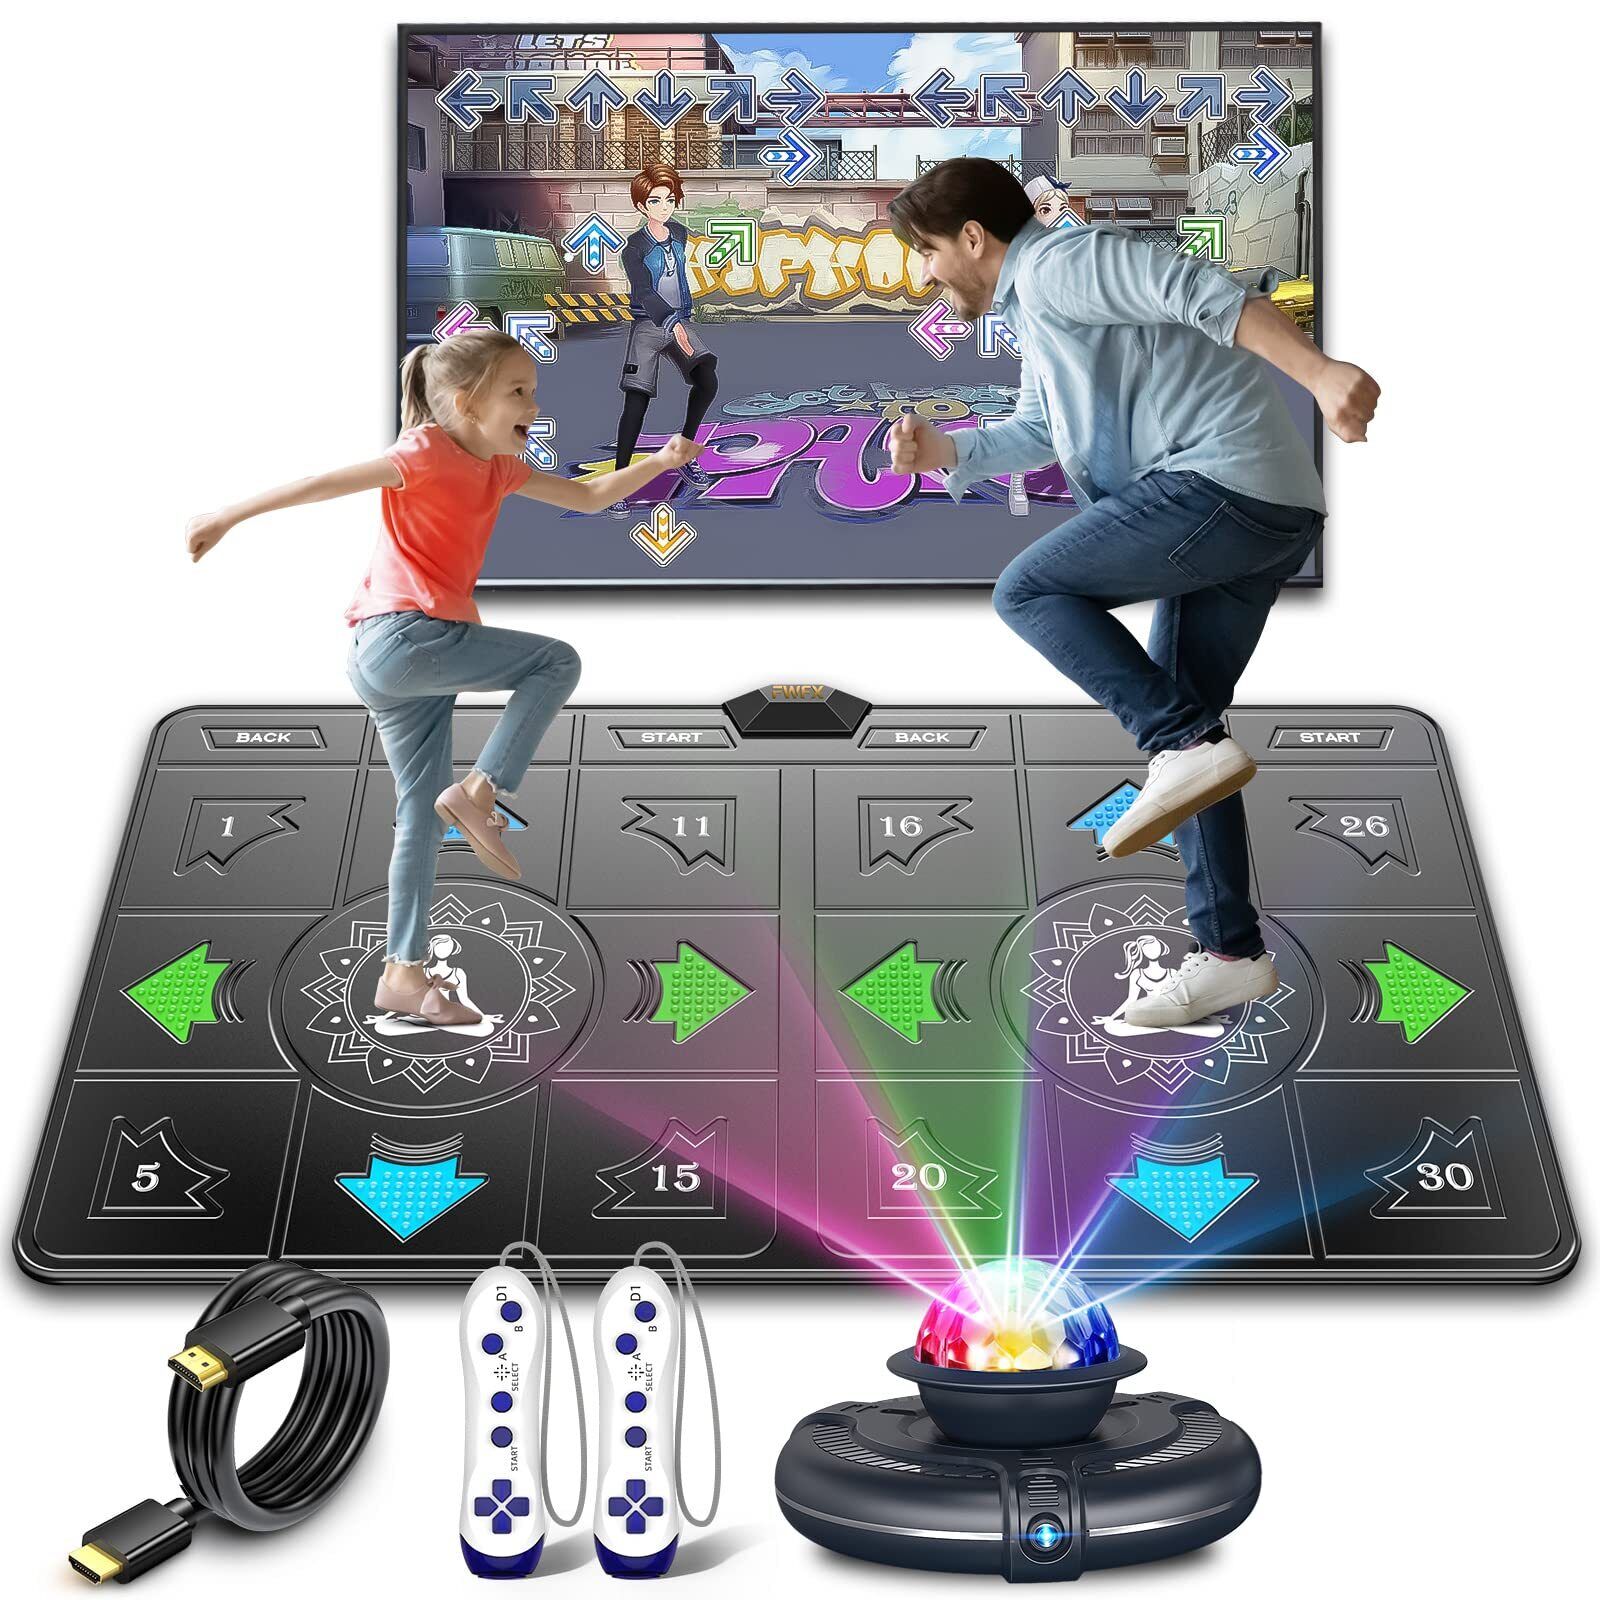 Smart FWFX Dance Mat for Kids and Adults Musical Electronic Dance Mats with HD Came… on eBay